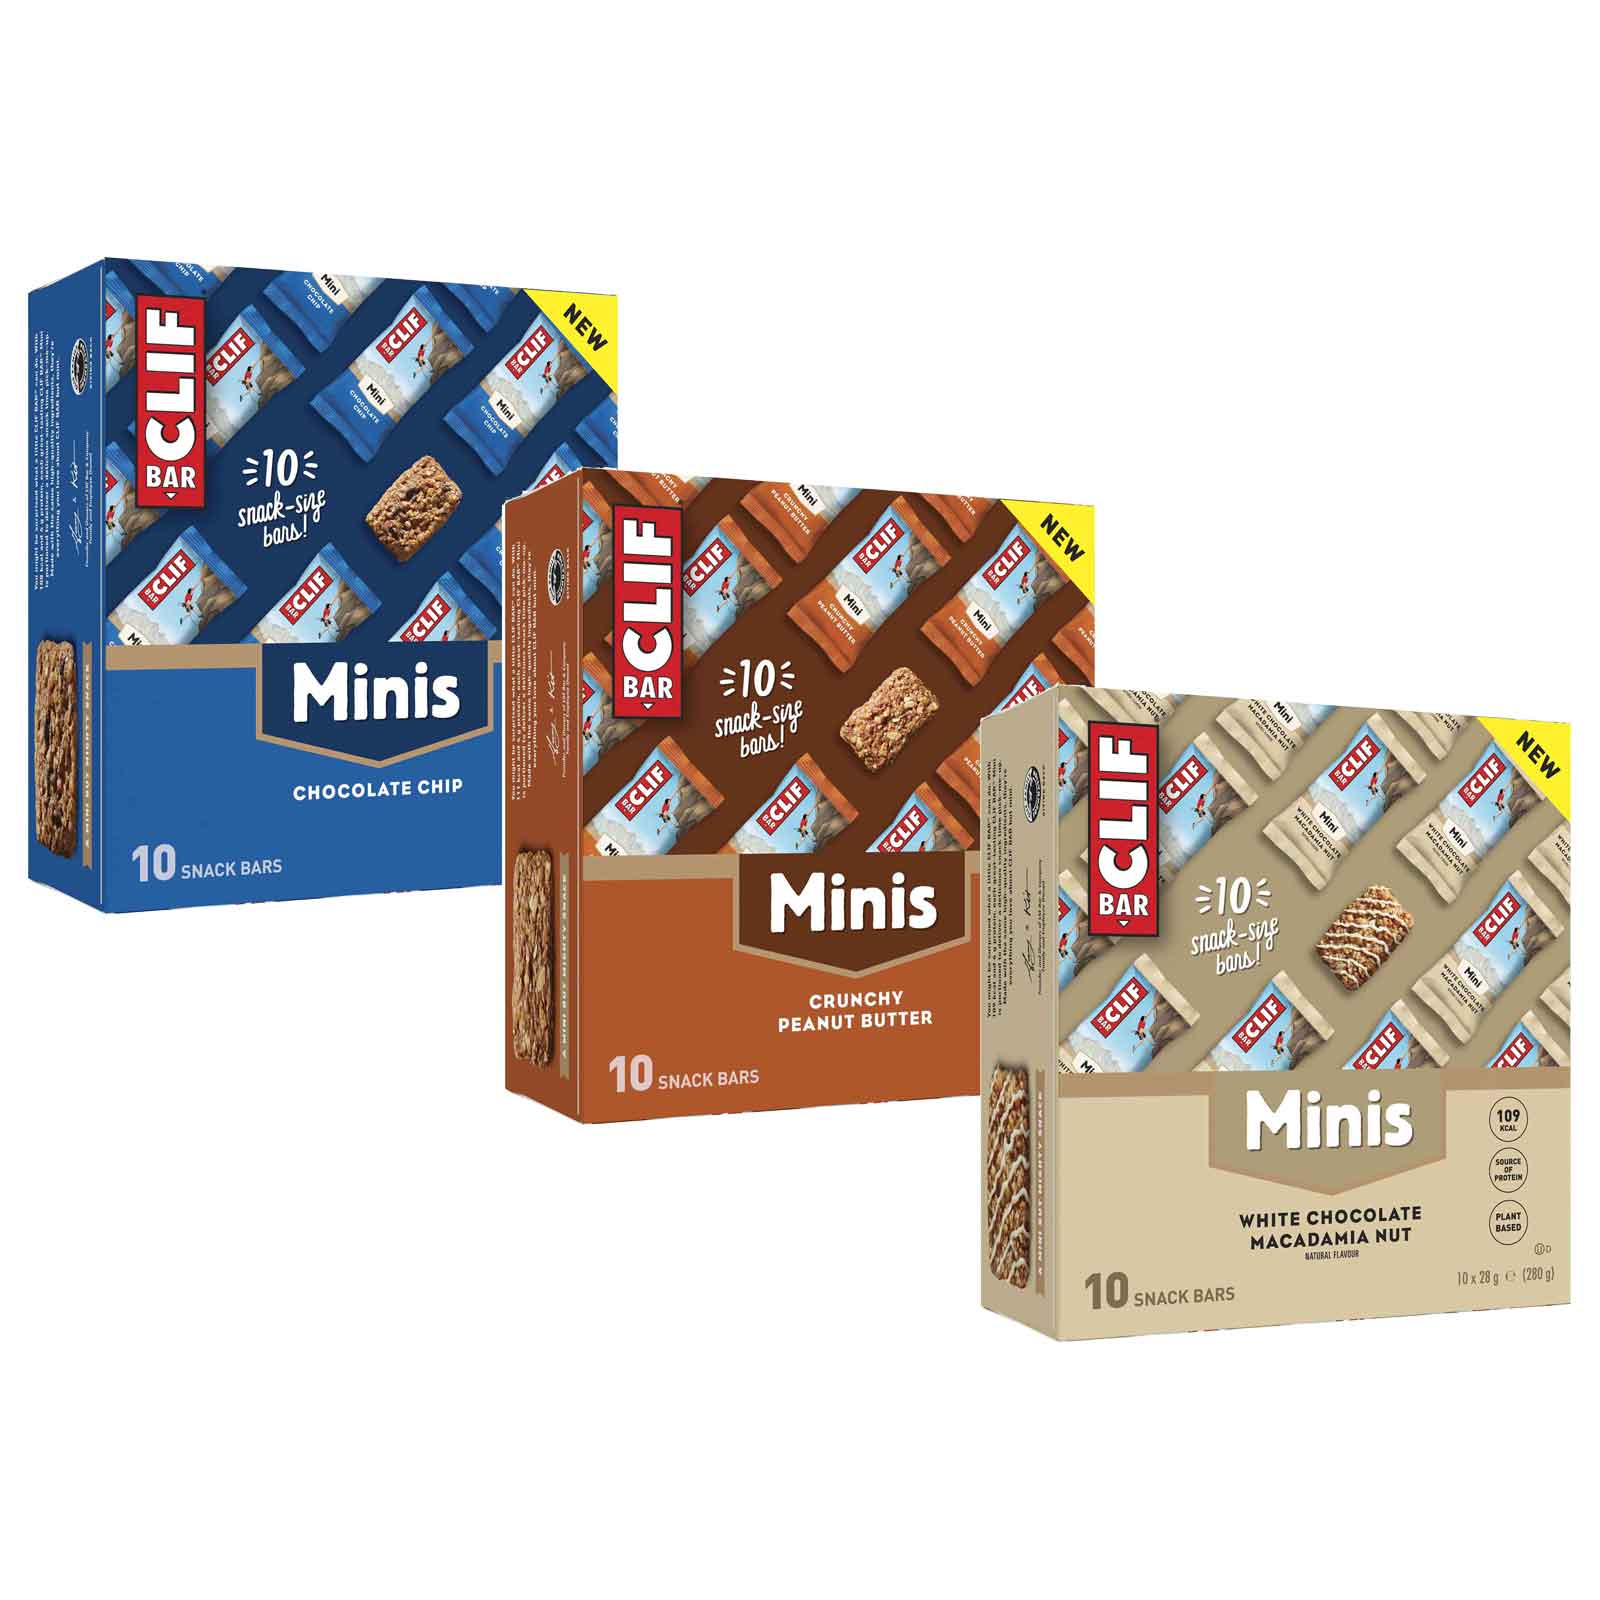 Productfoto van Clif Bar Minis - Carbohydrate-Protein-Bar - 10x28g